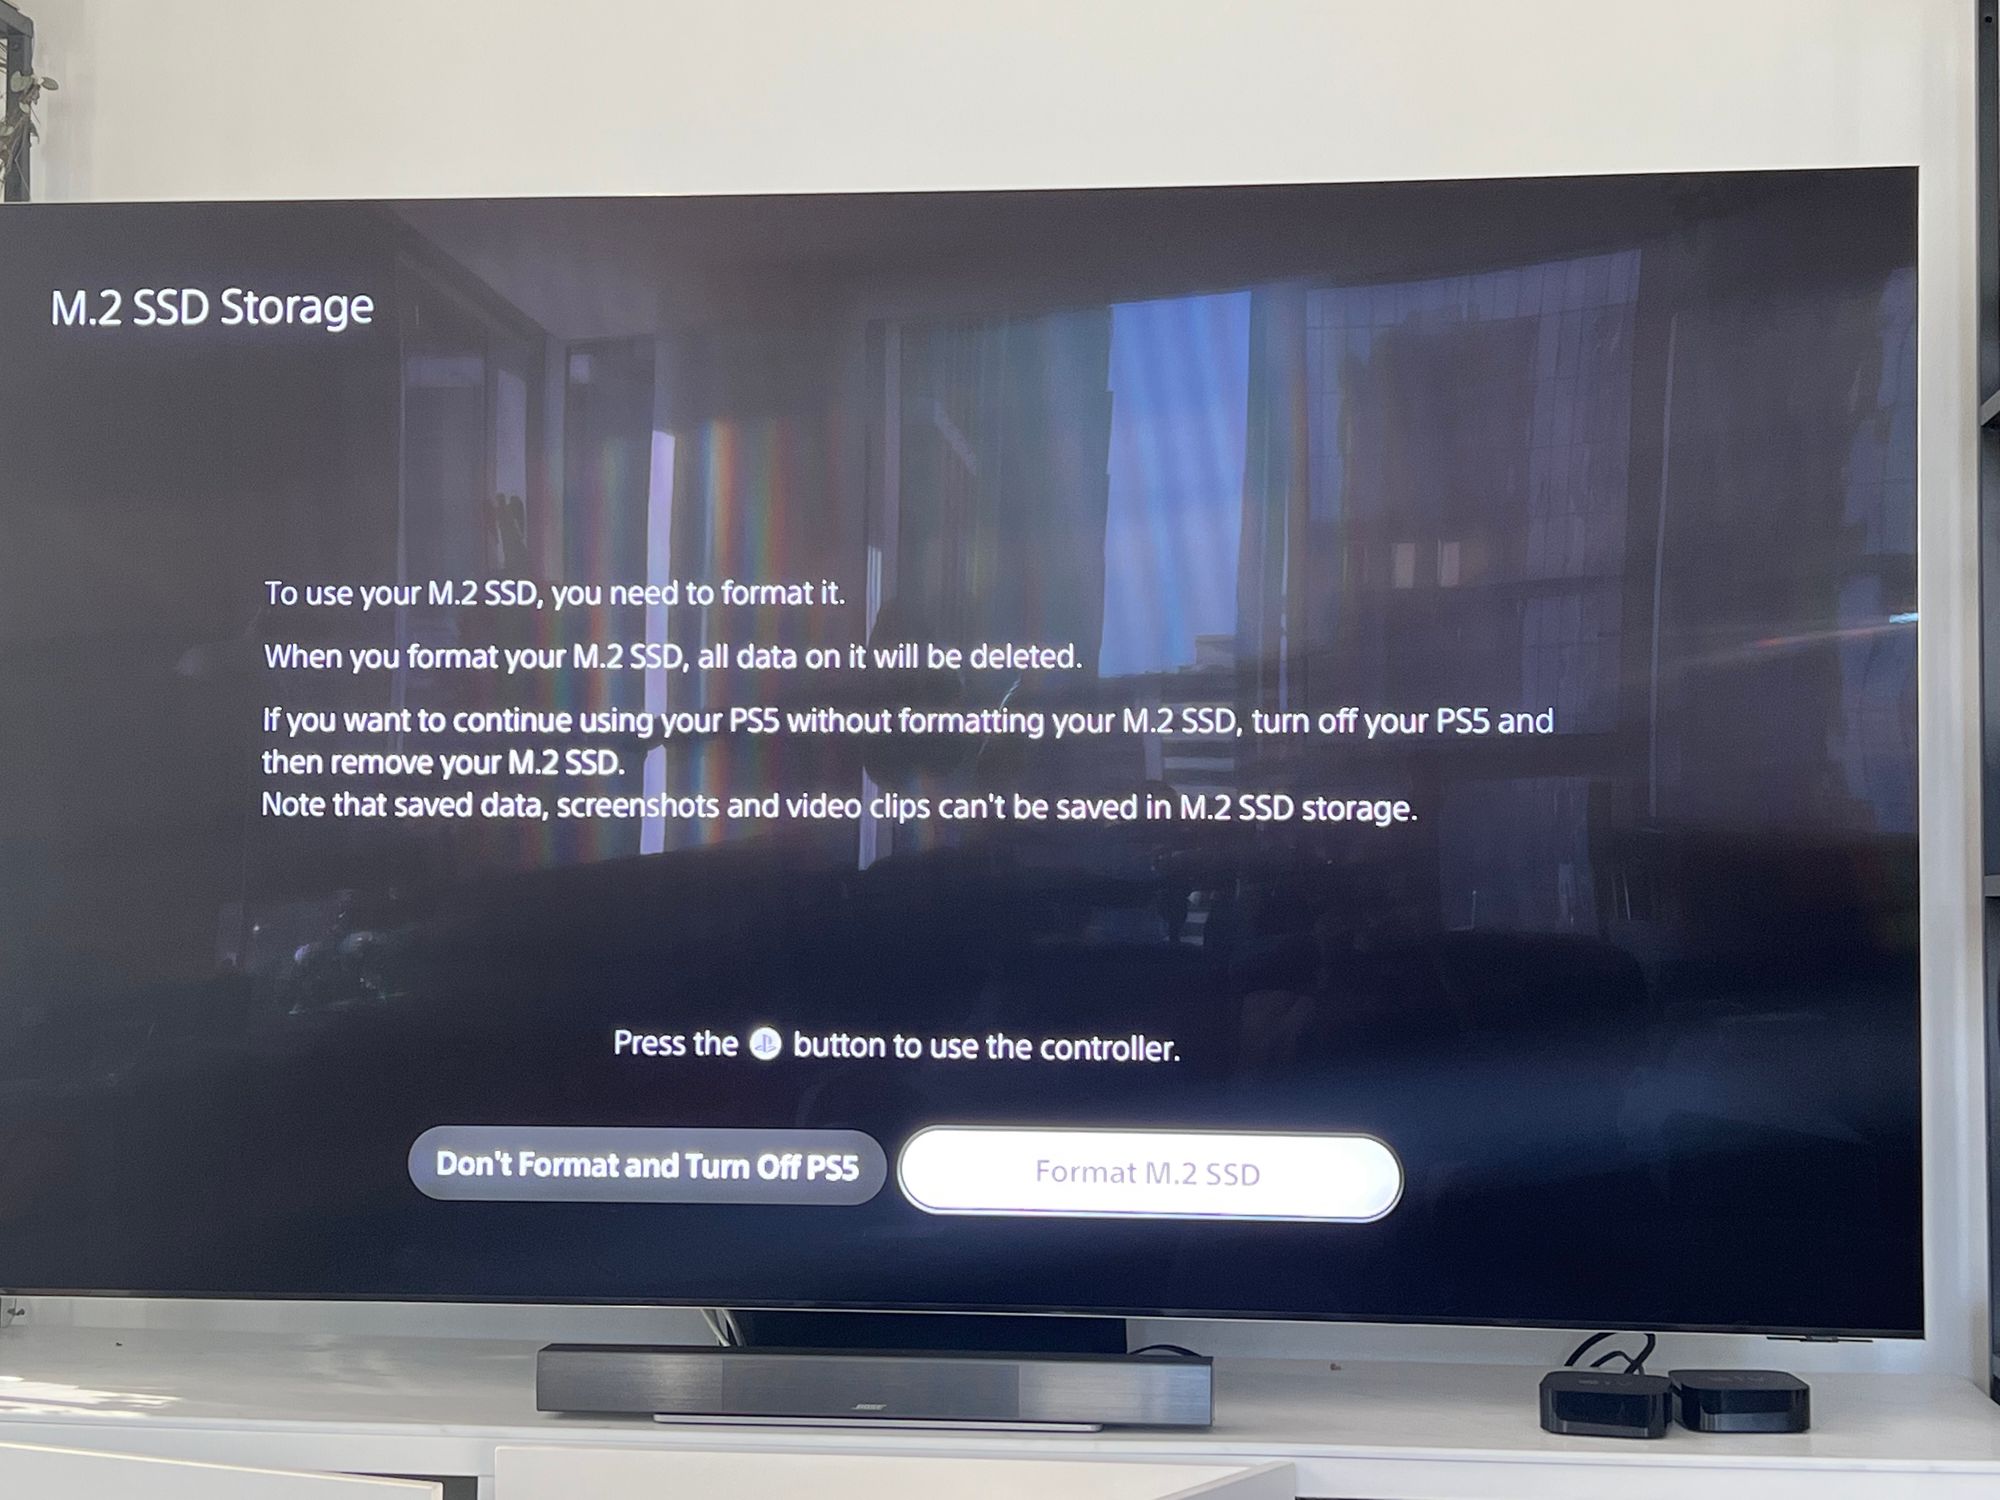 A picture of a TV with the M.2 SSD Storage notice asking if the user would like to format the drive, or not format it and just turn off the PS5.